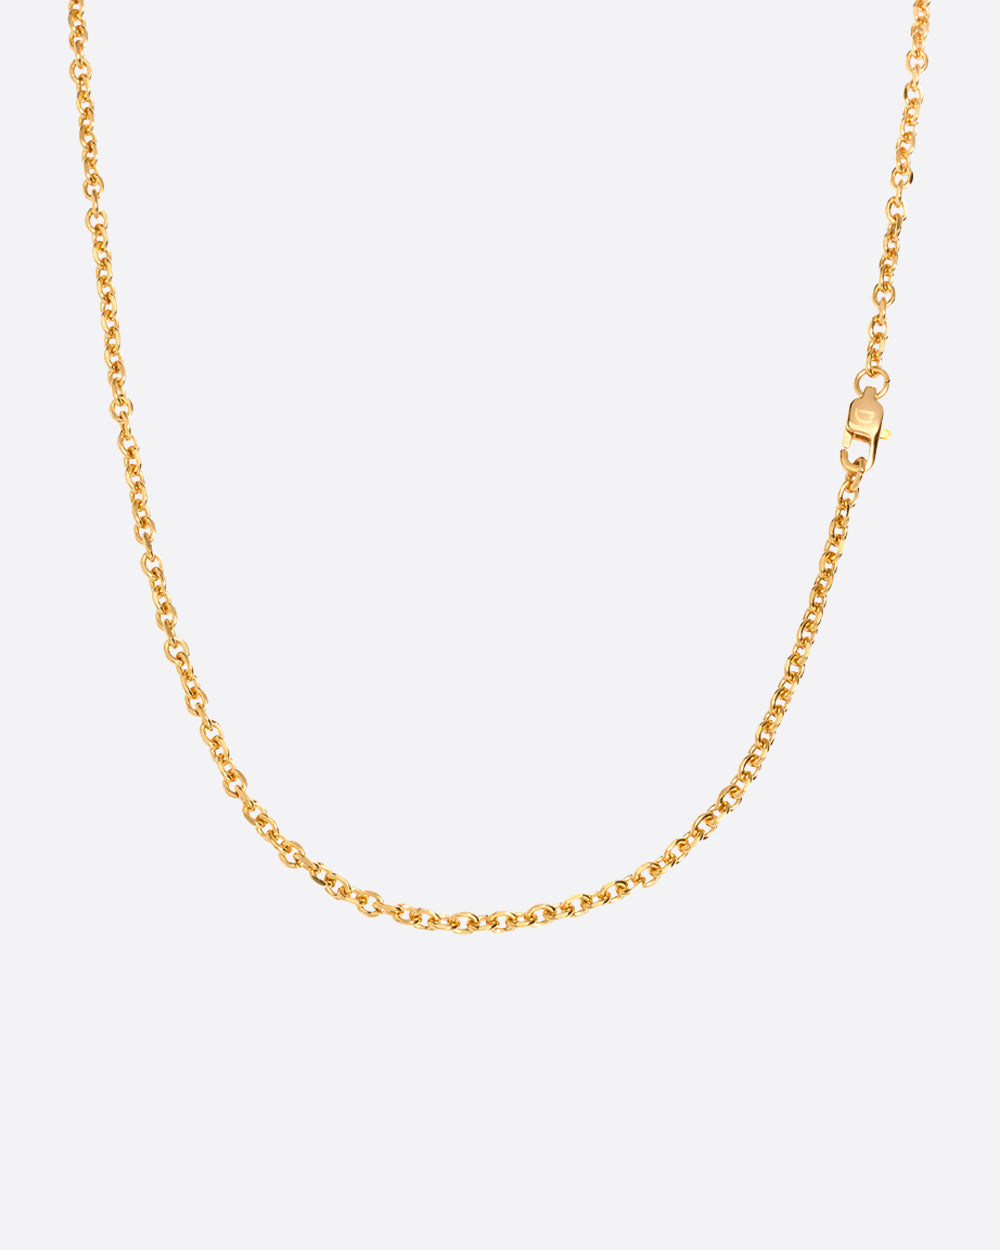 CLEAN CABLE LINK CHAIN. - 3MM 18K GOLD